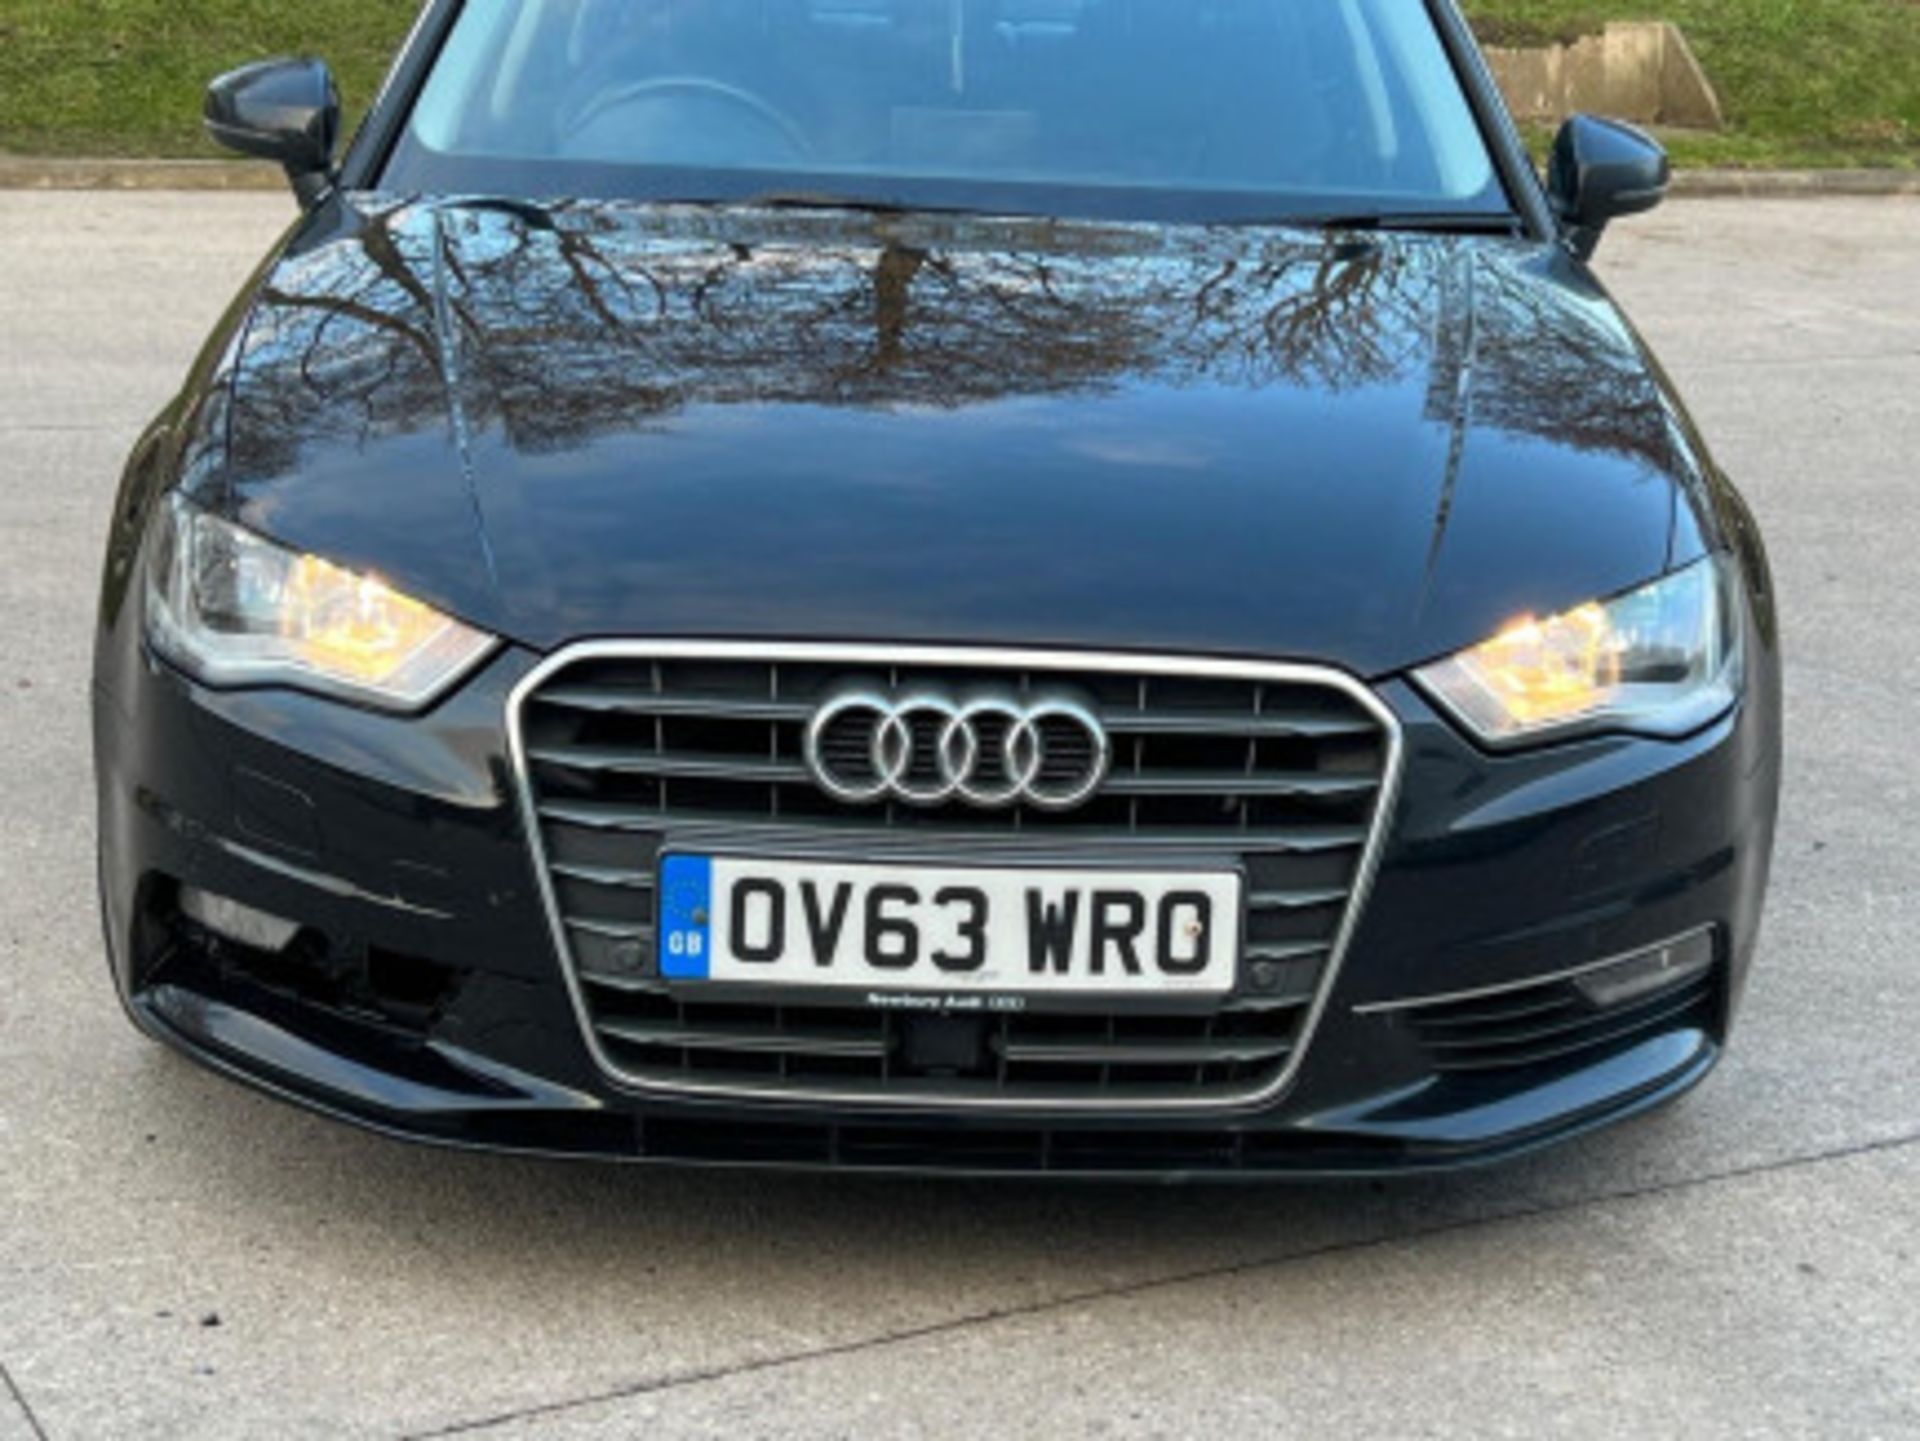 AUDI A3 2.0TDI SPORTBACK - STYLE, PERFORMANCE, AND COMFORT COMBINED >>--NO VAT ON HAMMER--<< - Image 110 of 216